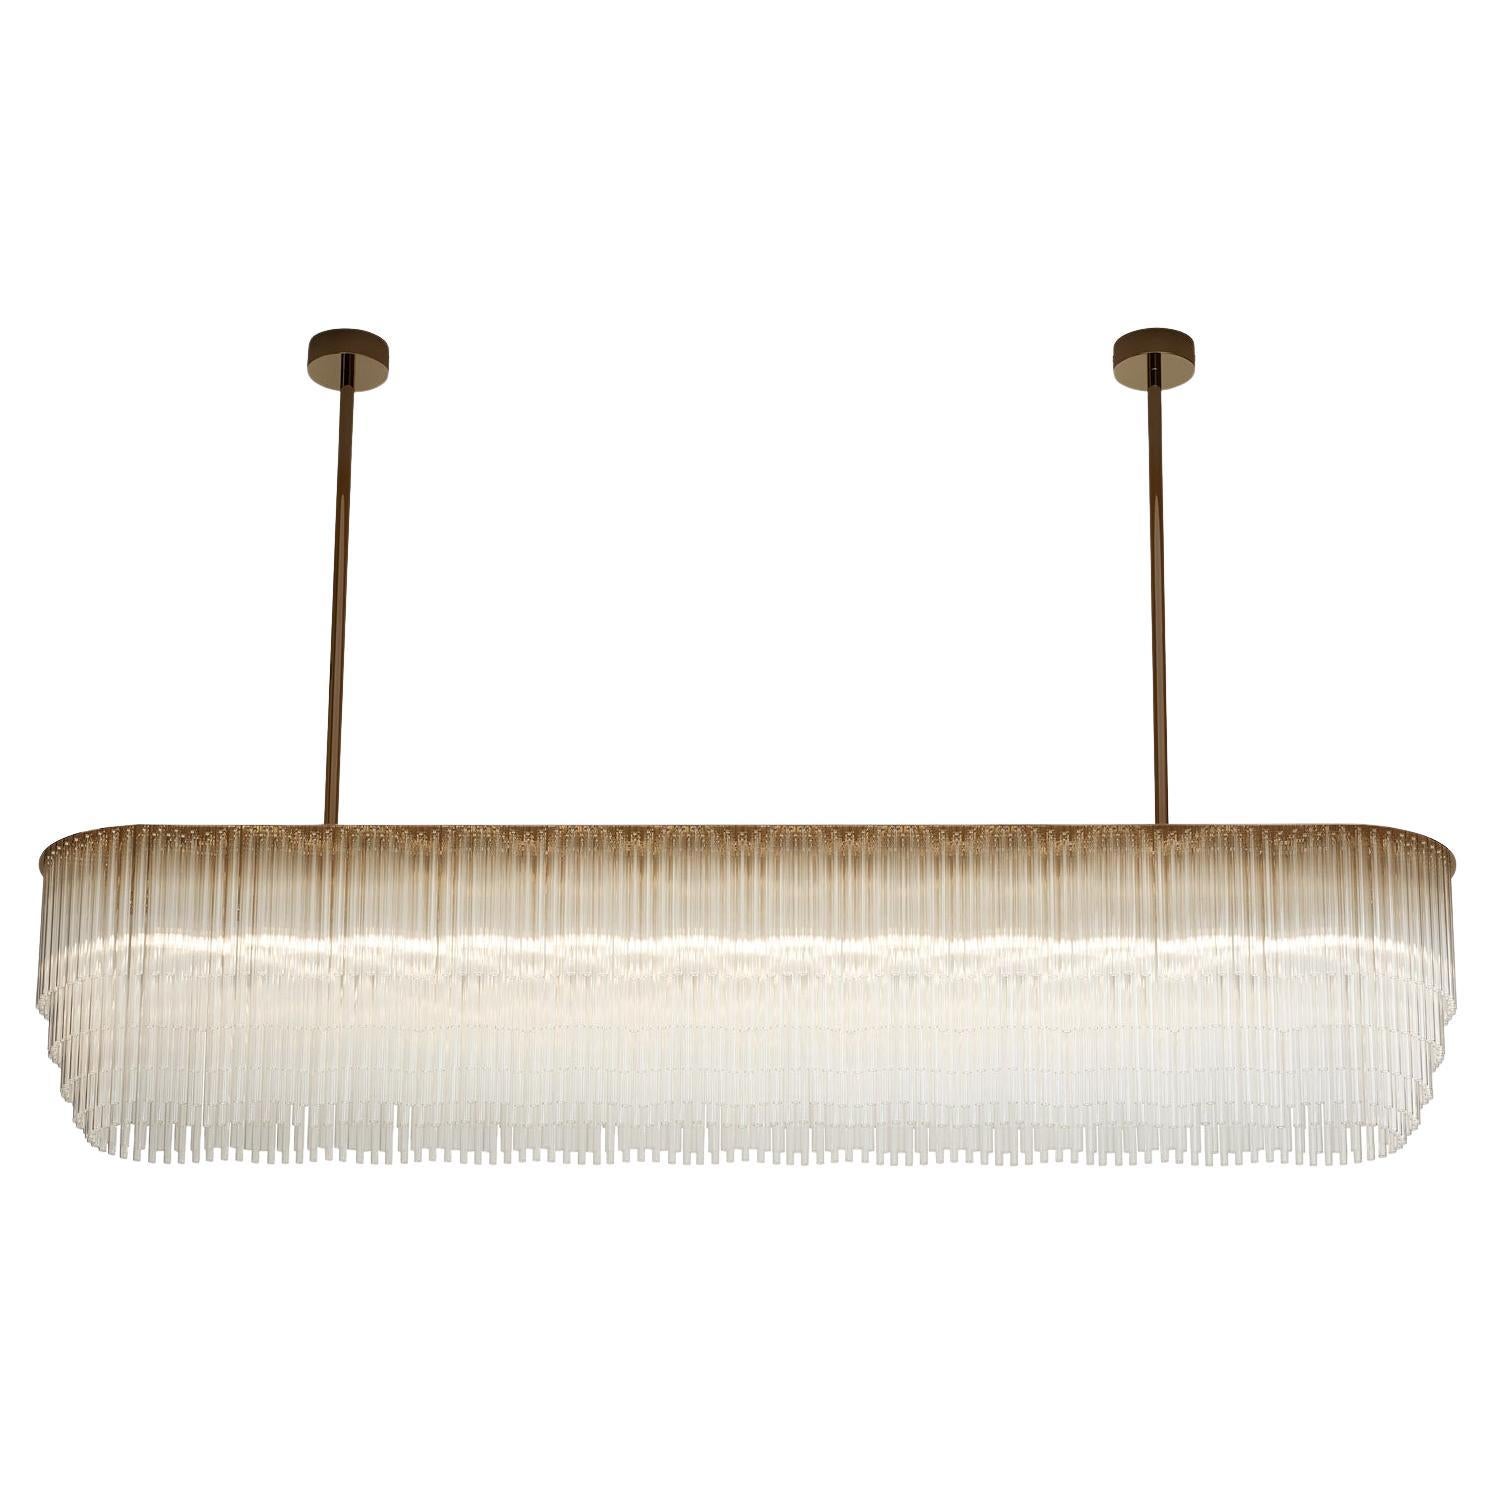 Linear Chandelier 1588mm / 62.5" in Brass-based Bronze with Tiered Glass Profile